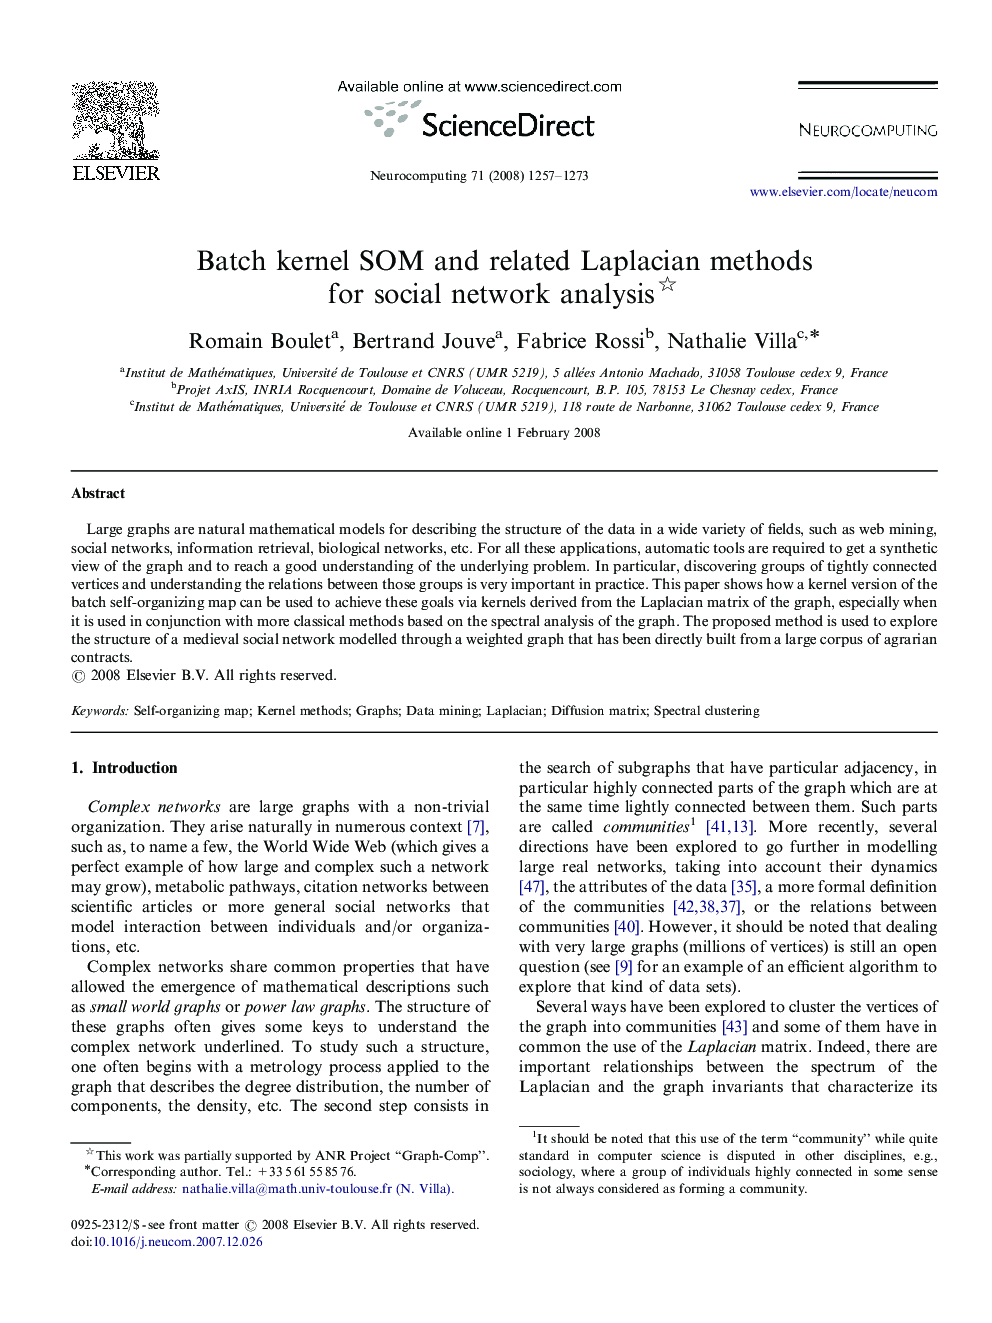 Batch kernel SOM and related Laplacian methods for social network analysis 